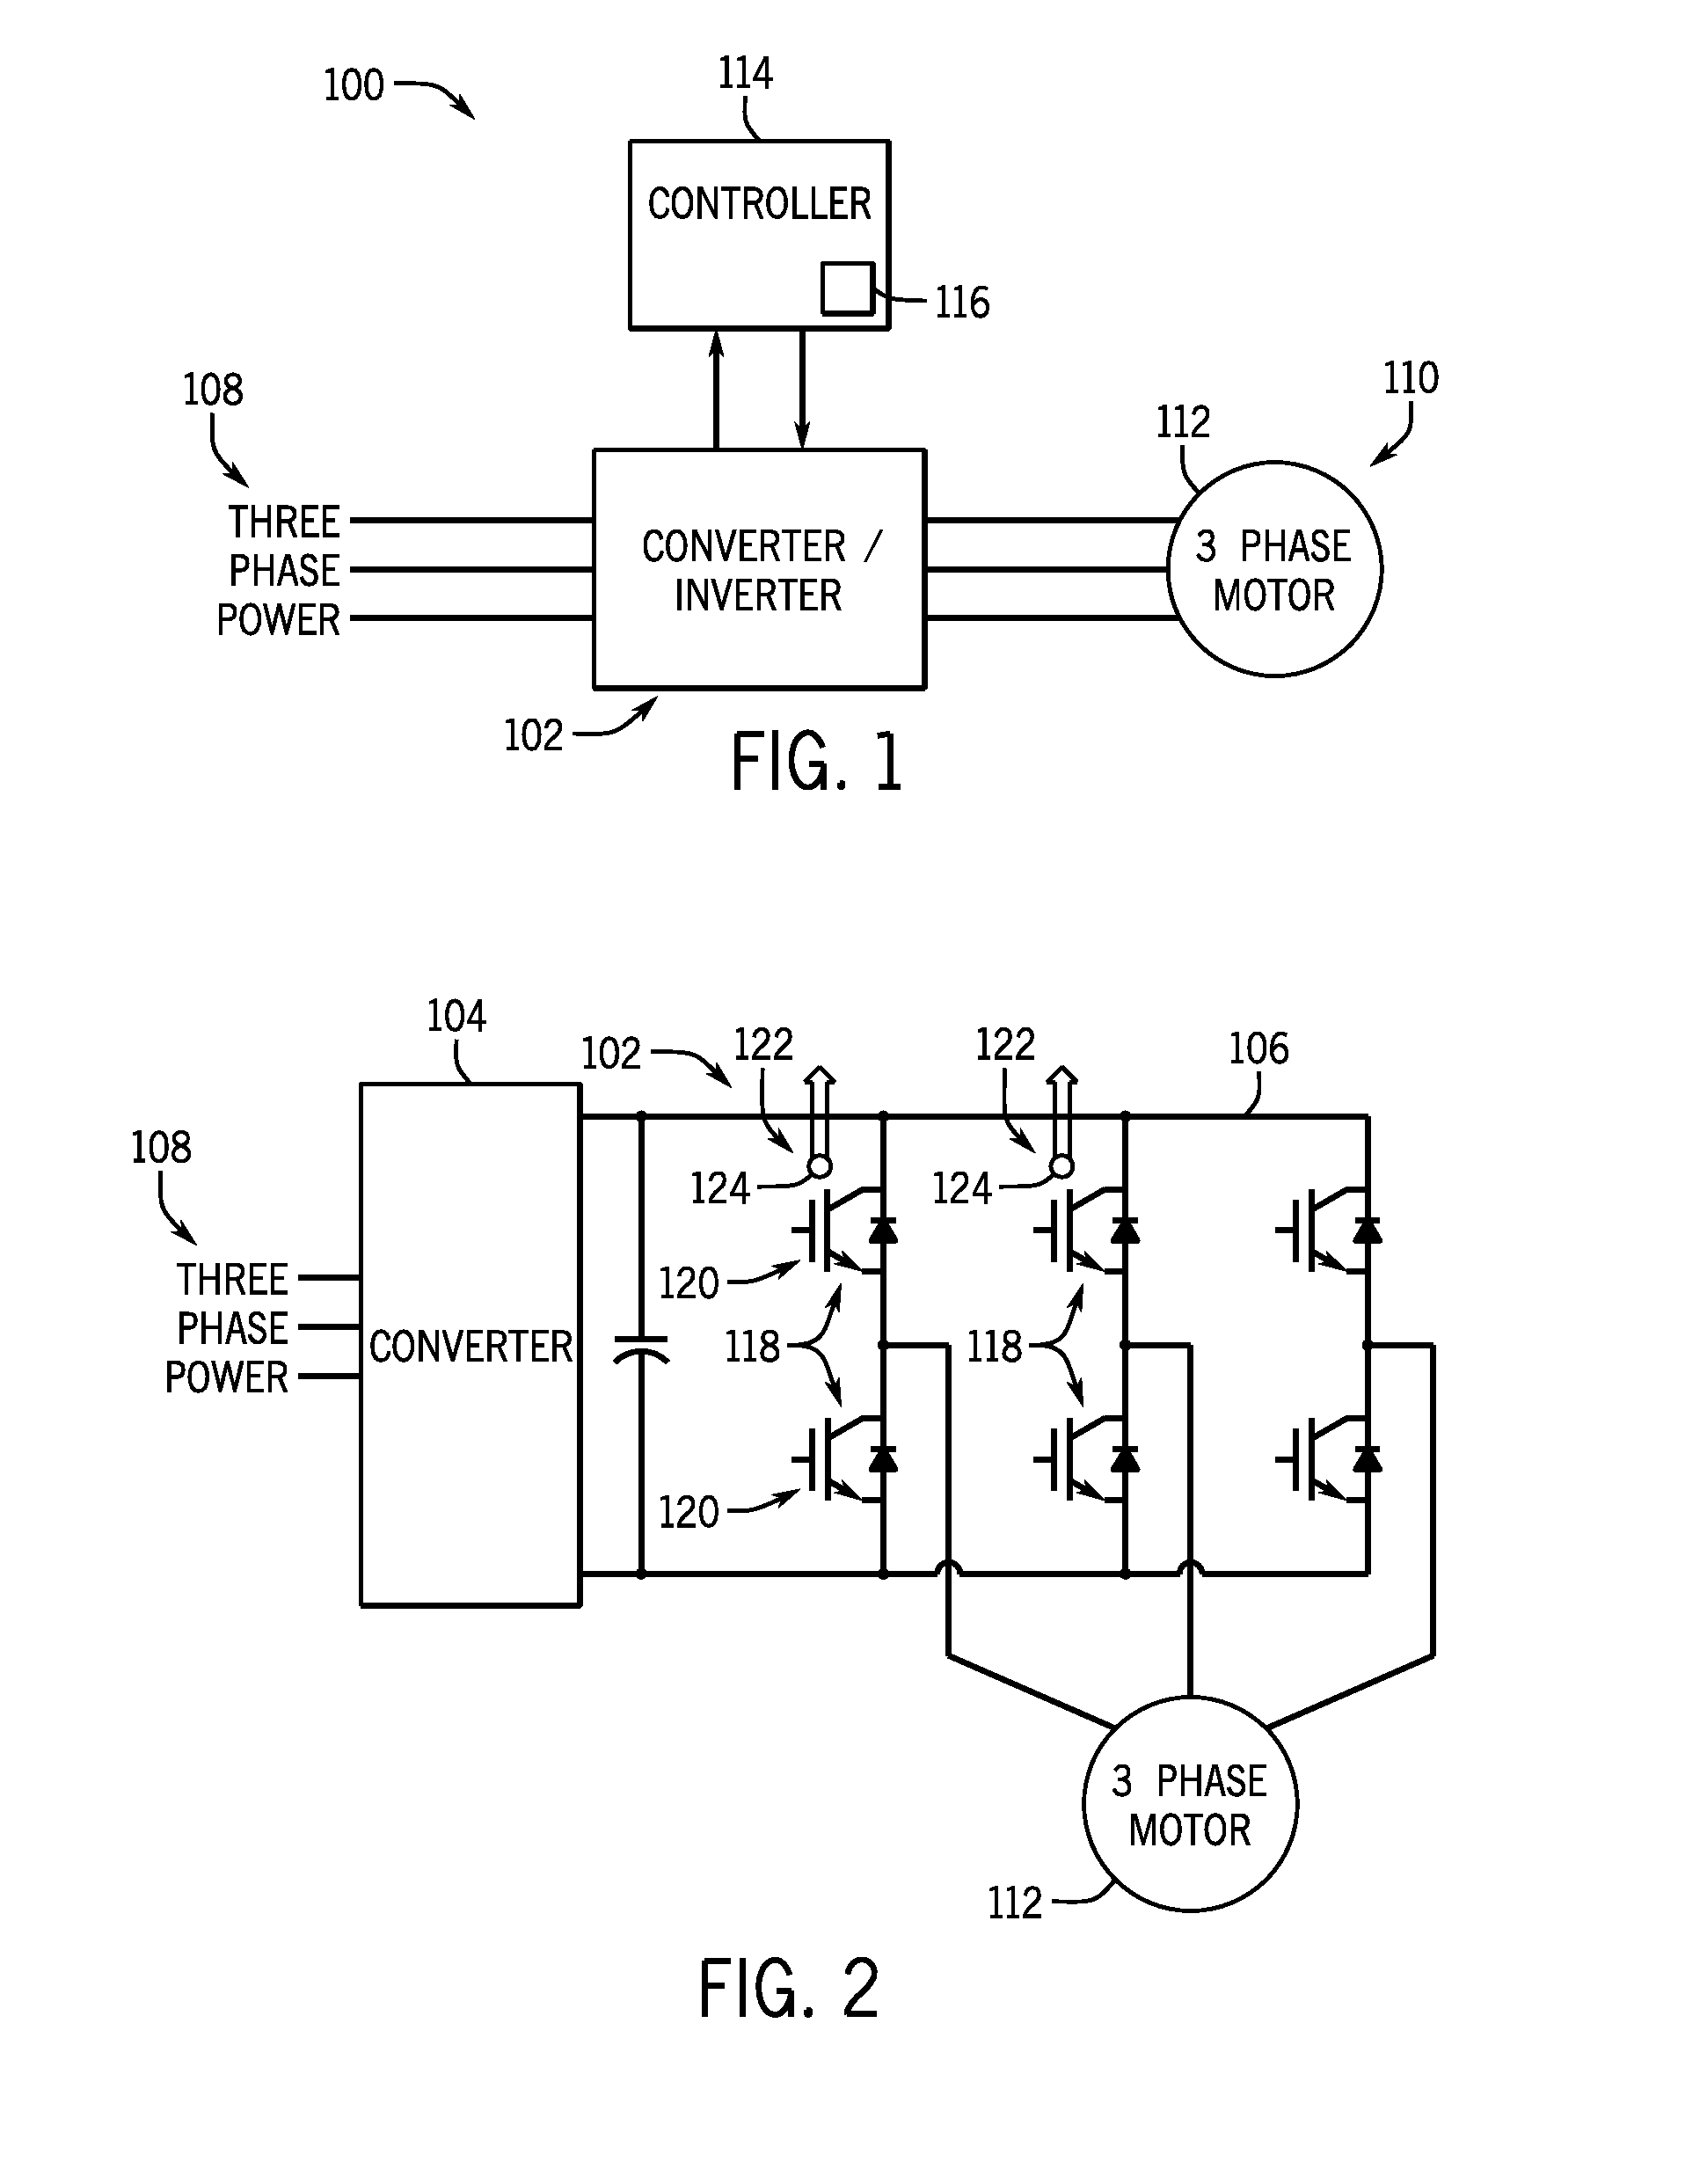 Thermal Protection For Electrical Device